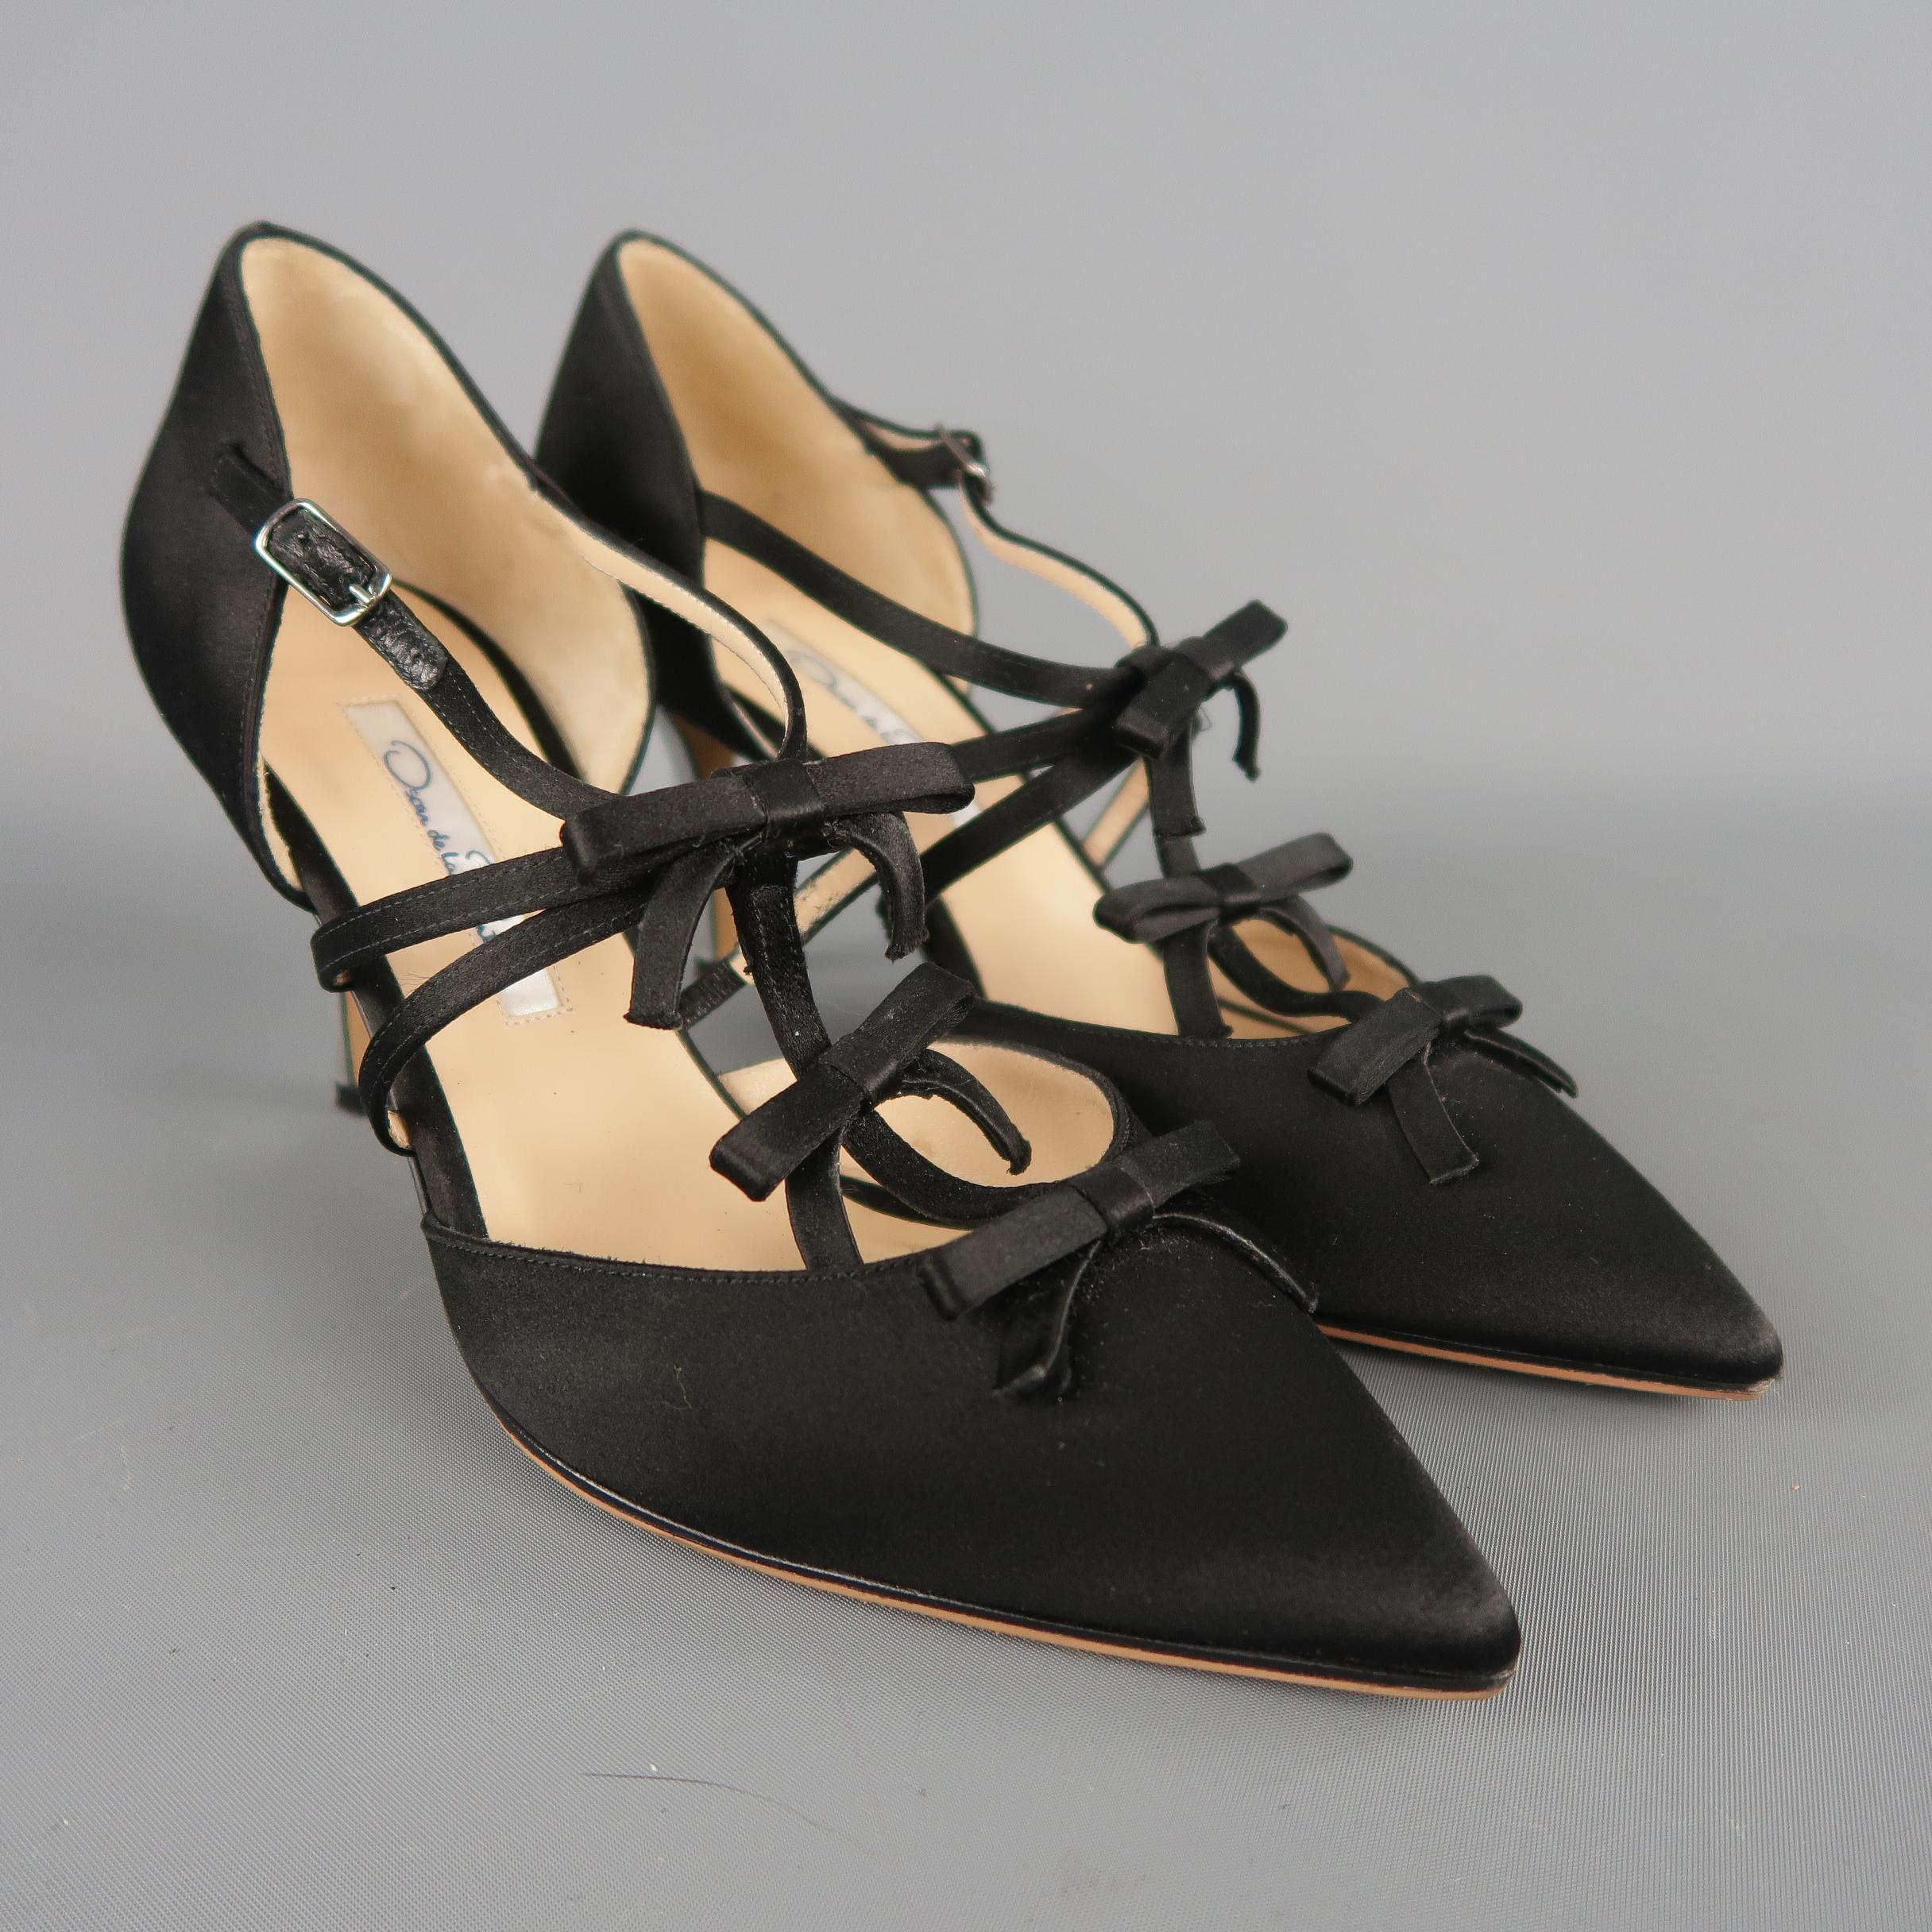 OSCAR DE LA RENTA pumps come in black silk satin with a pointed toe, silver metallic leather covered stiletto heel, and T strap with bows. Made in Italy.
 
Excellent Pre-Owned Condition.
Marked: IT 36.5
 
Measurements:
 
Heel: 3 in.